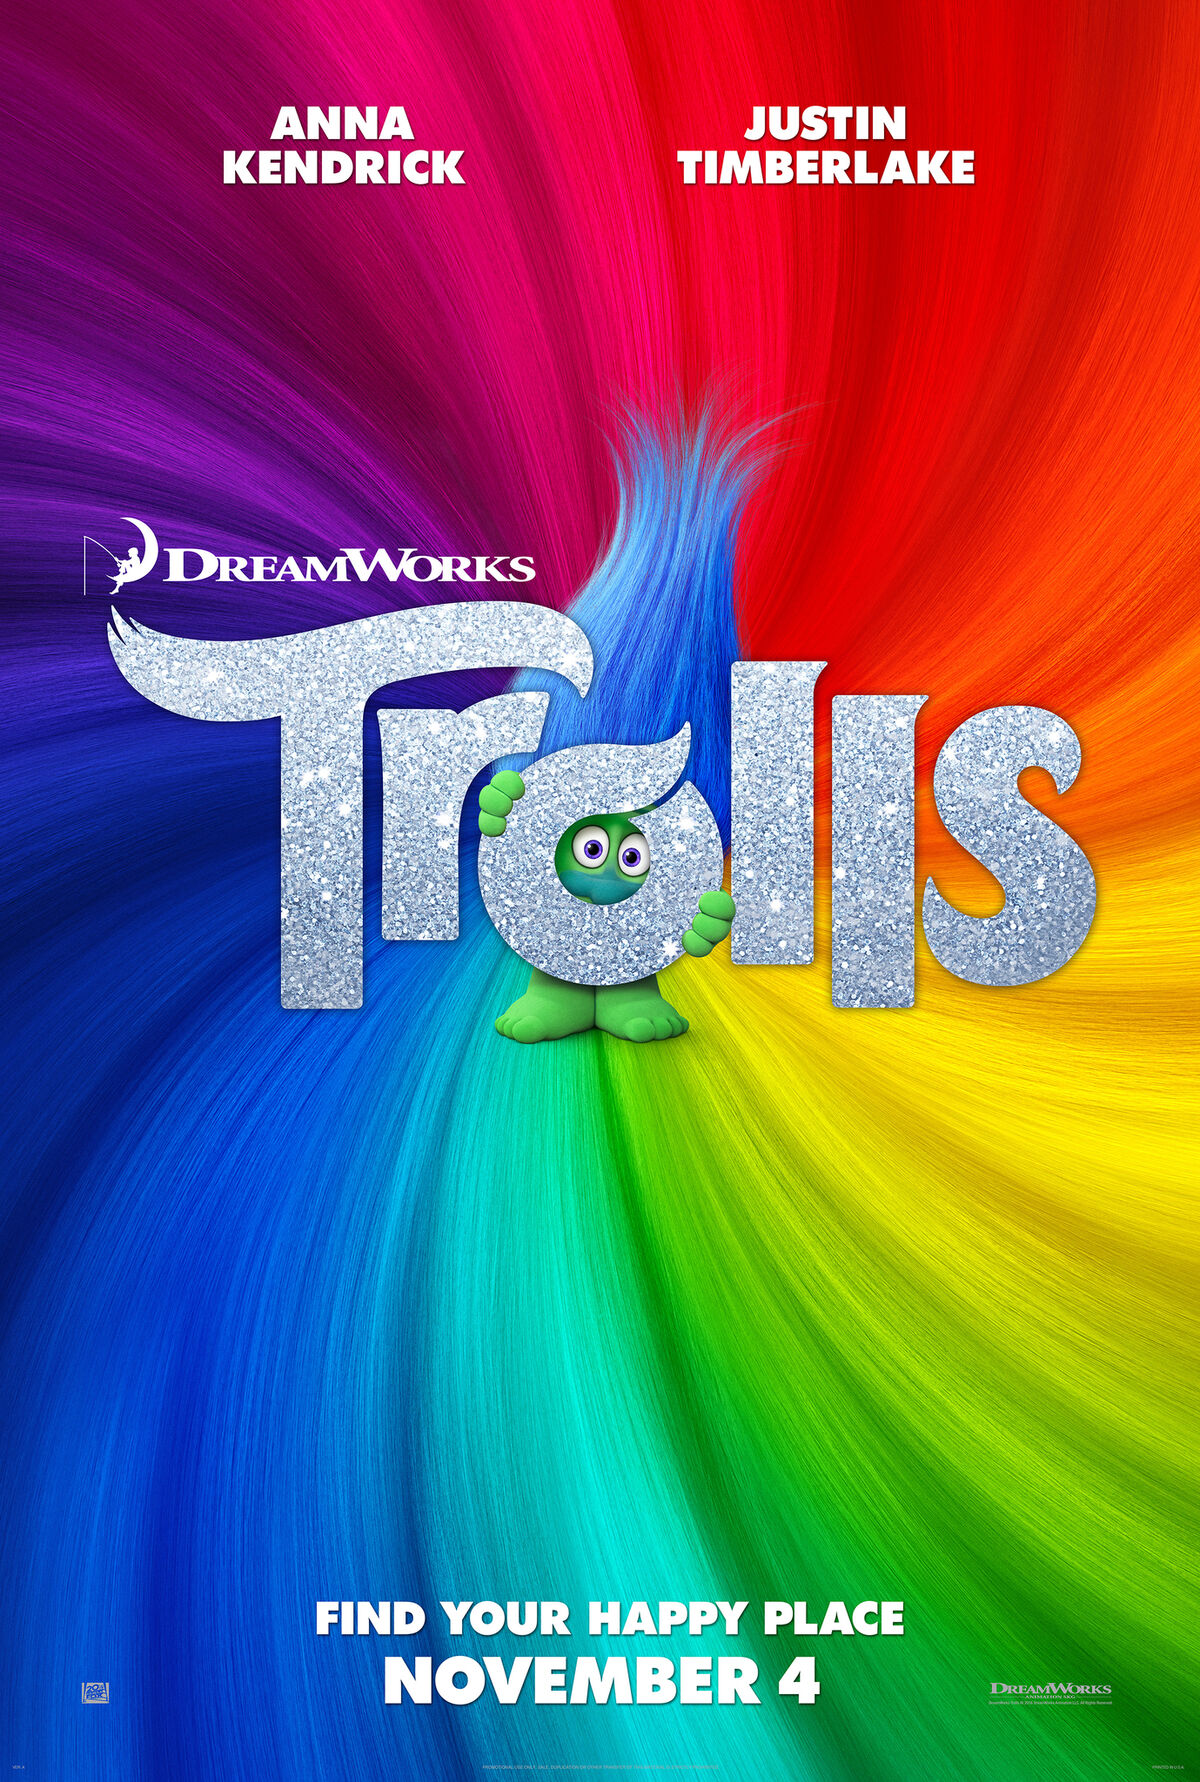 The troll face facts - Free stories online. Create books for kids